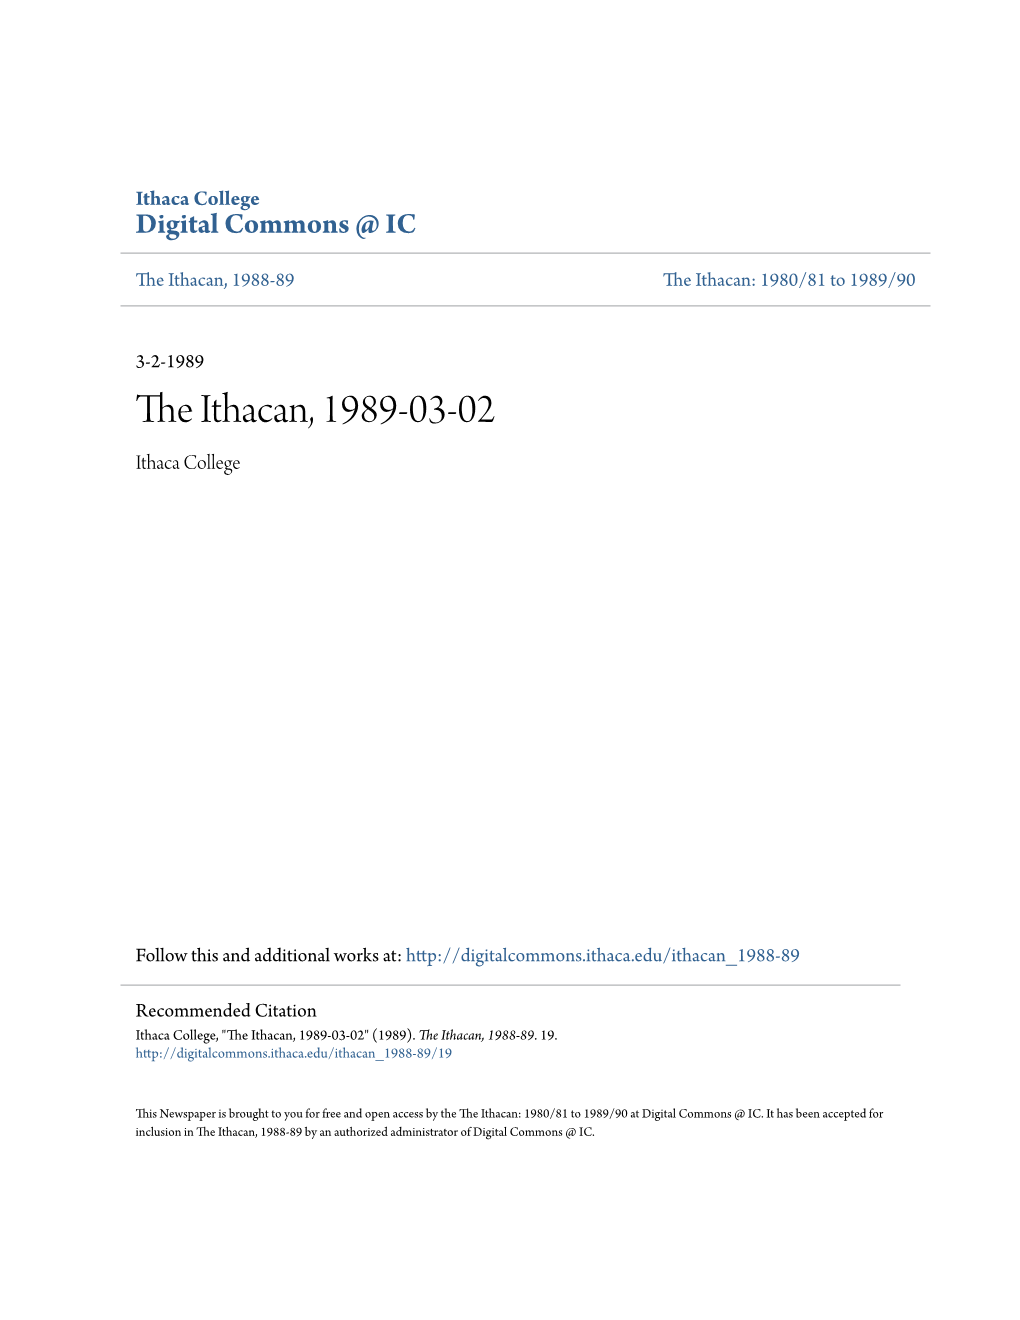 The Ithacan, 1989-03-02